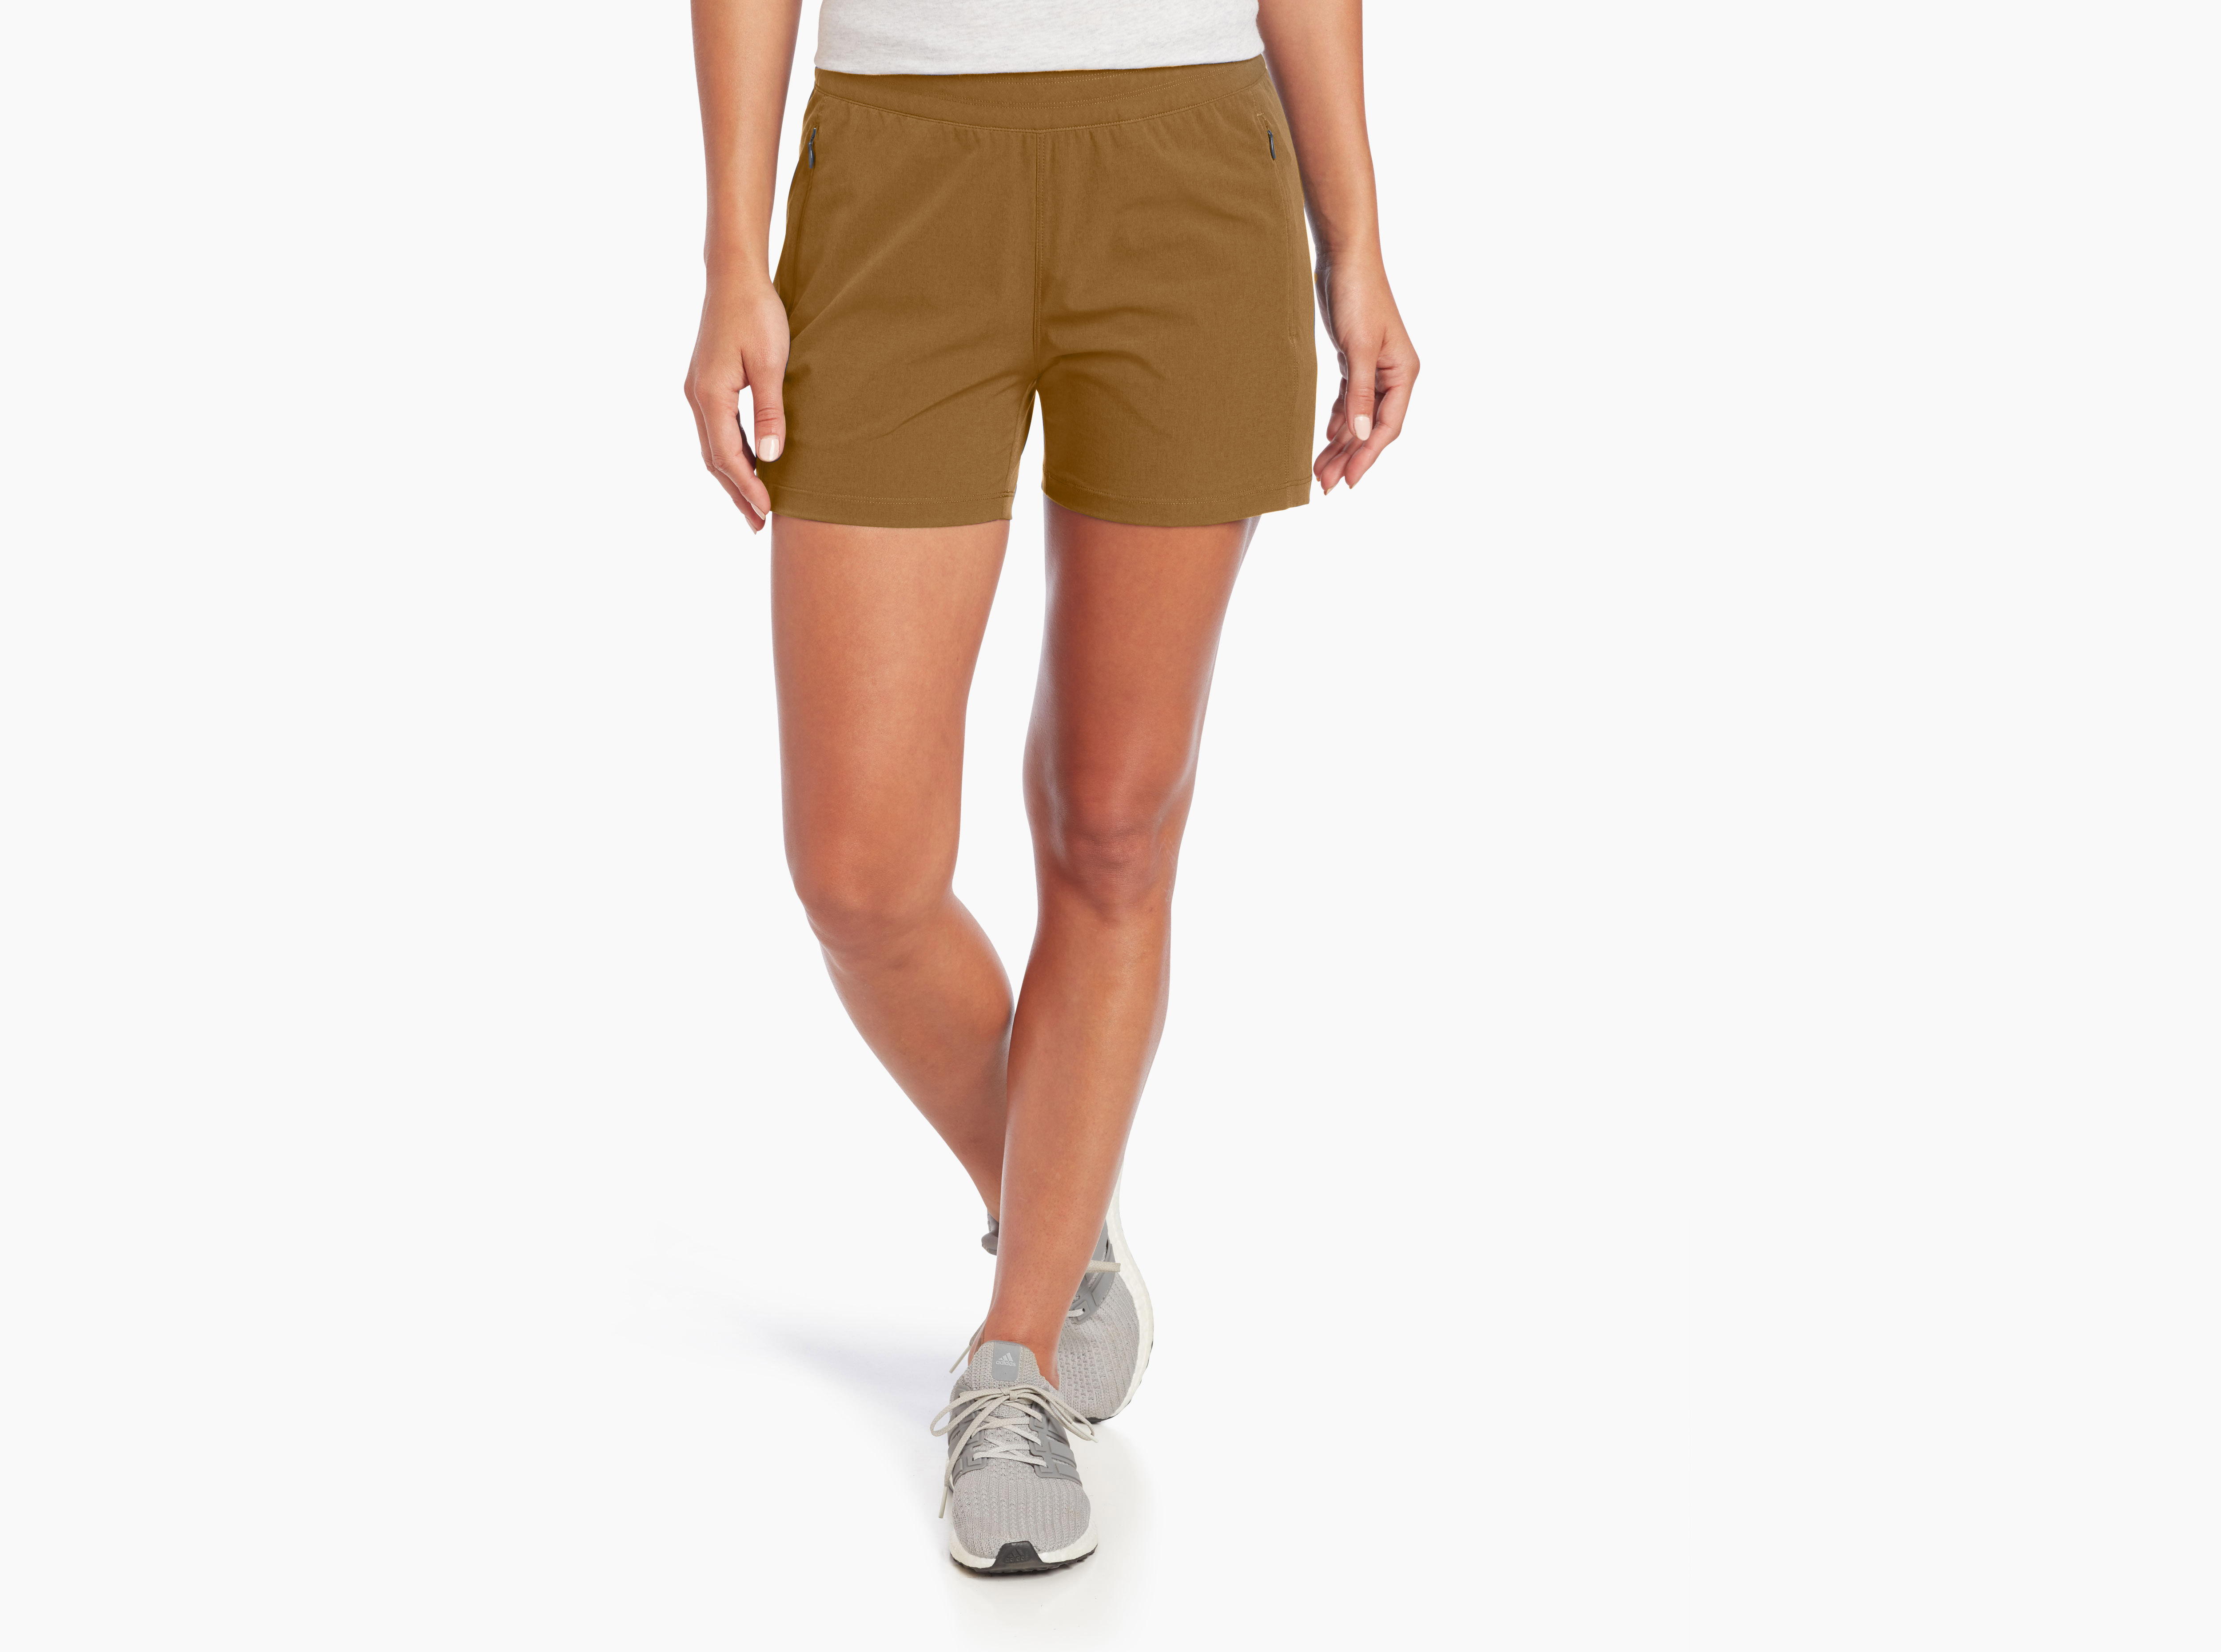 Kuhl Kultivatr Shorts, 4 Inseam - Womens, FREE SHIPPING in Canada